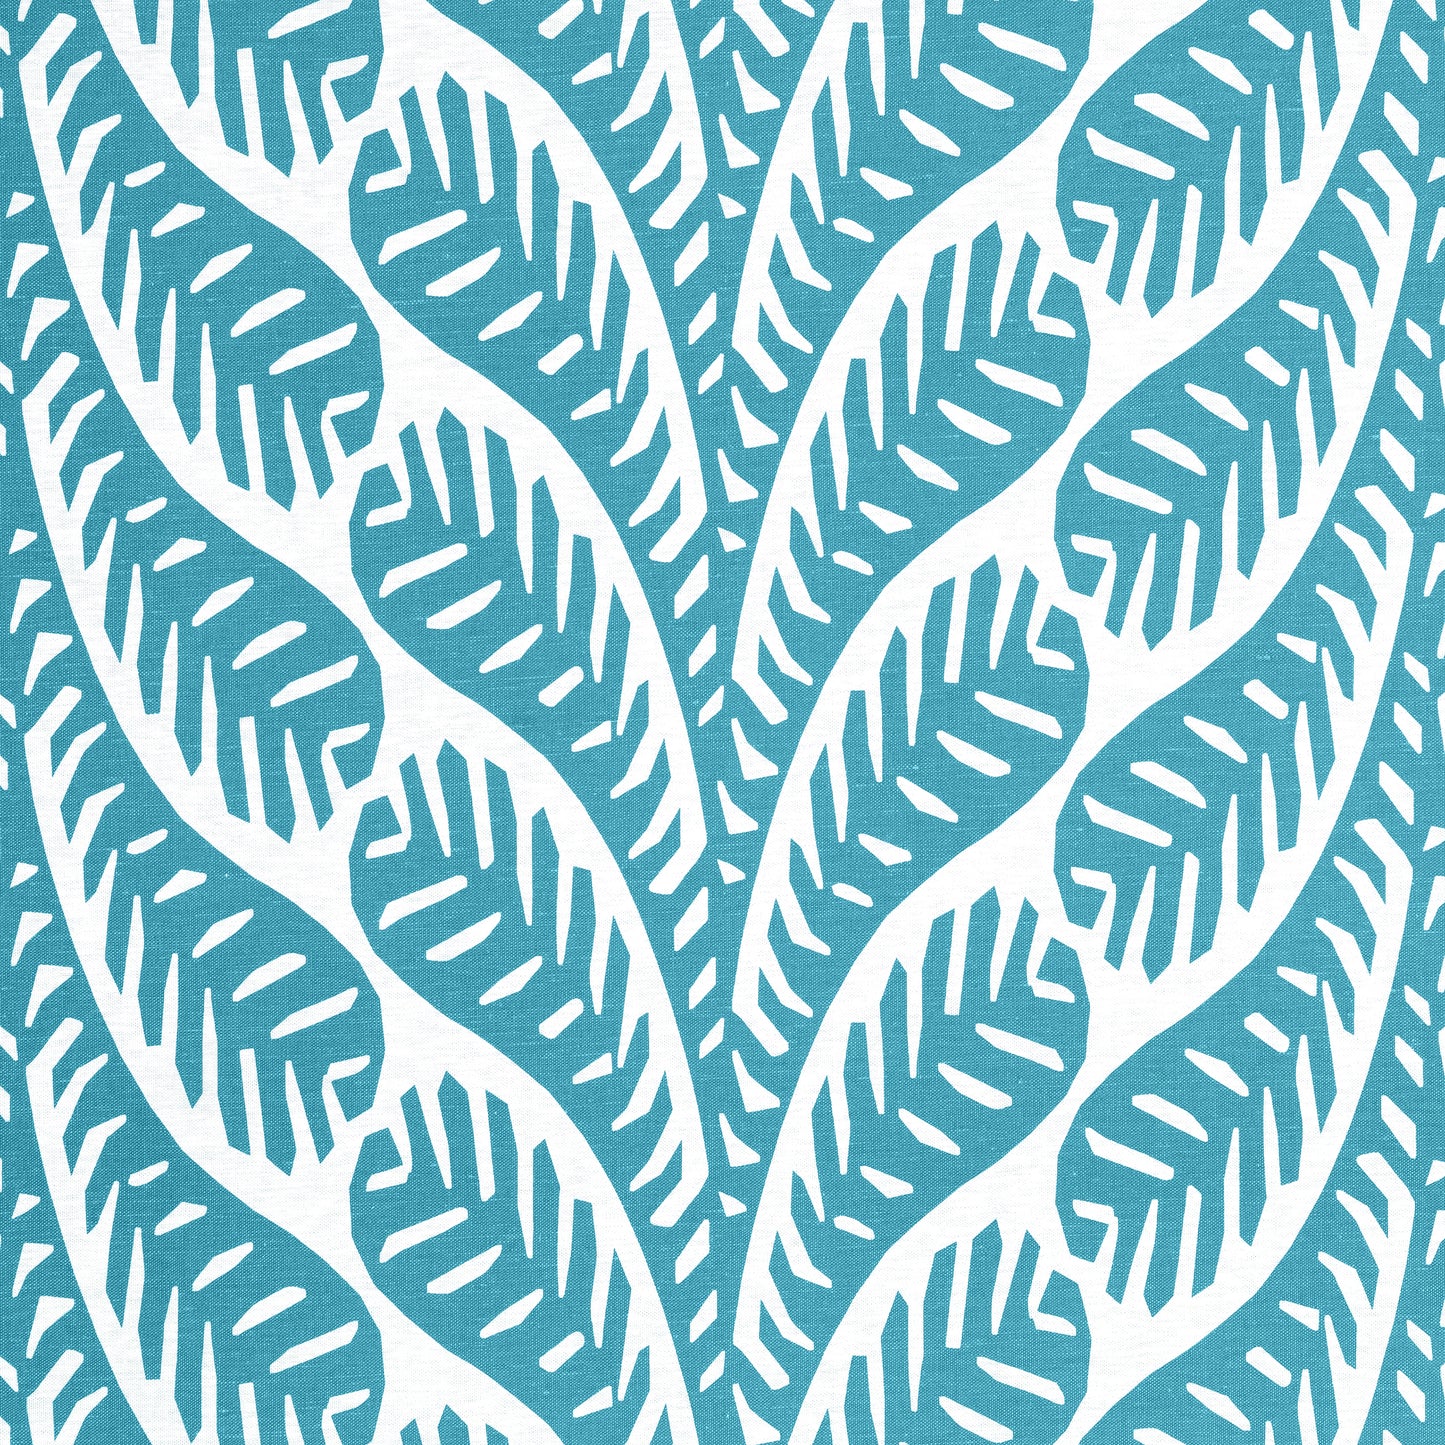 Purchase Thibaut Fabric Product# F920833 pattern name Ginger color Turquoise